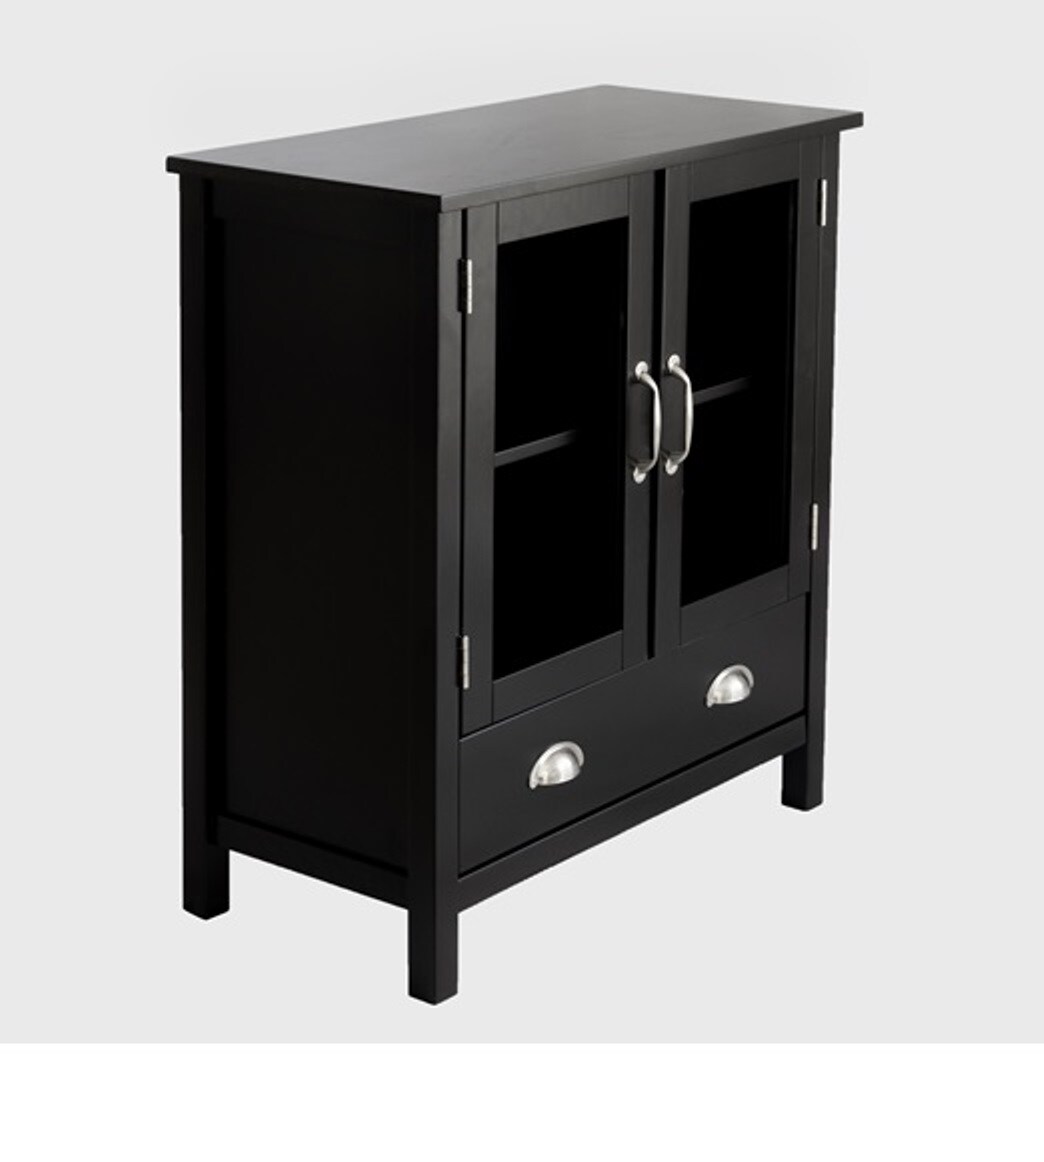 China cabinet Dining & Kitchen Storage at Lowes.com